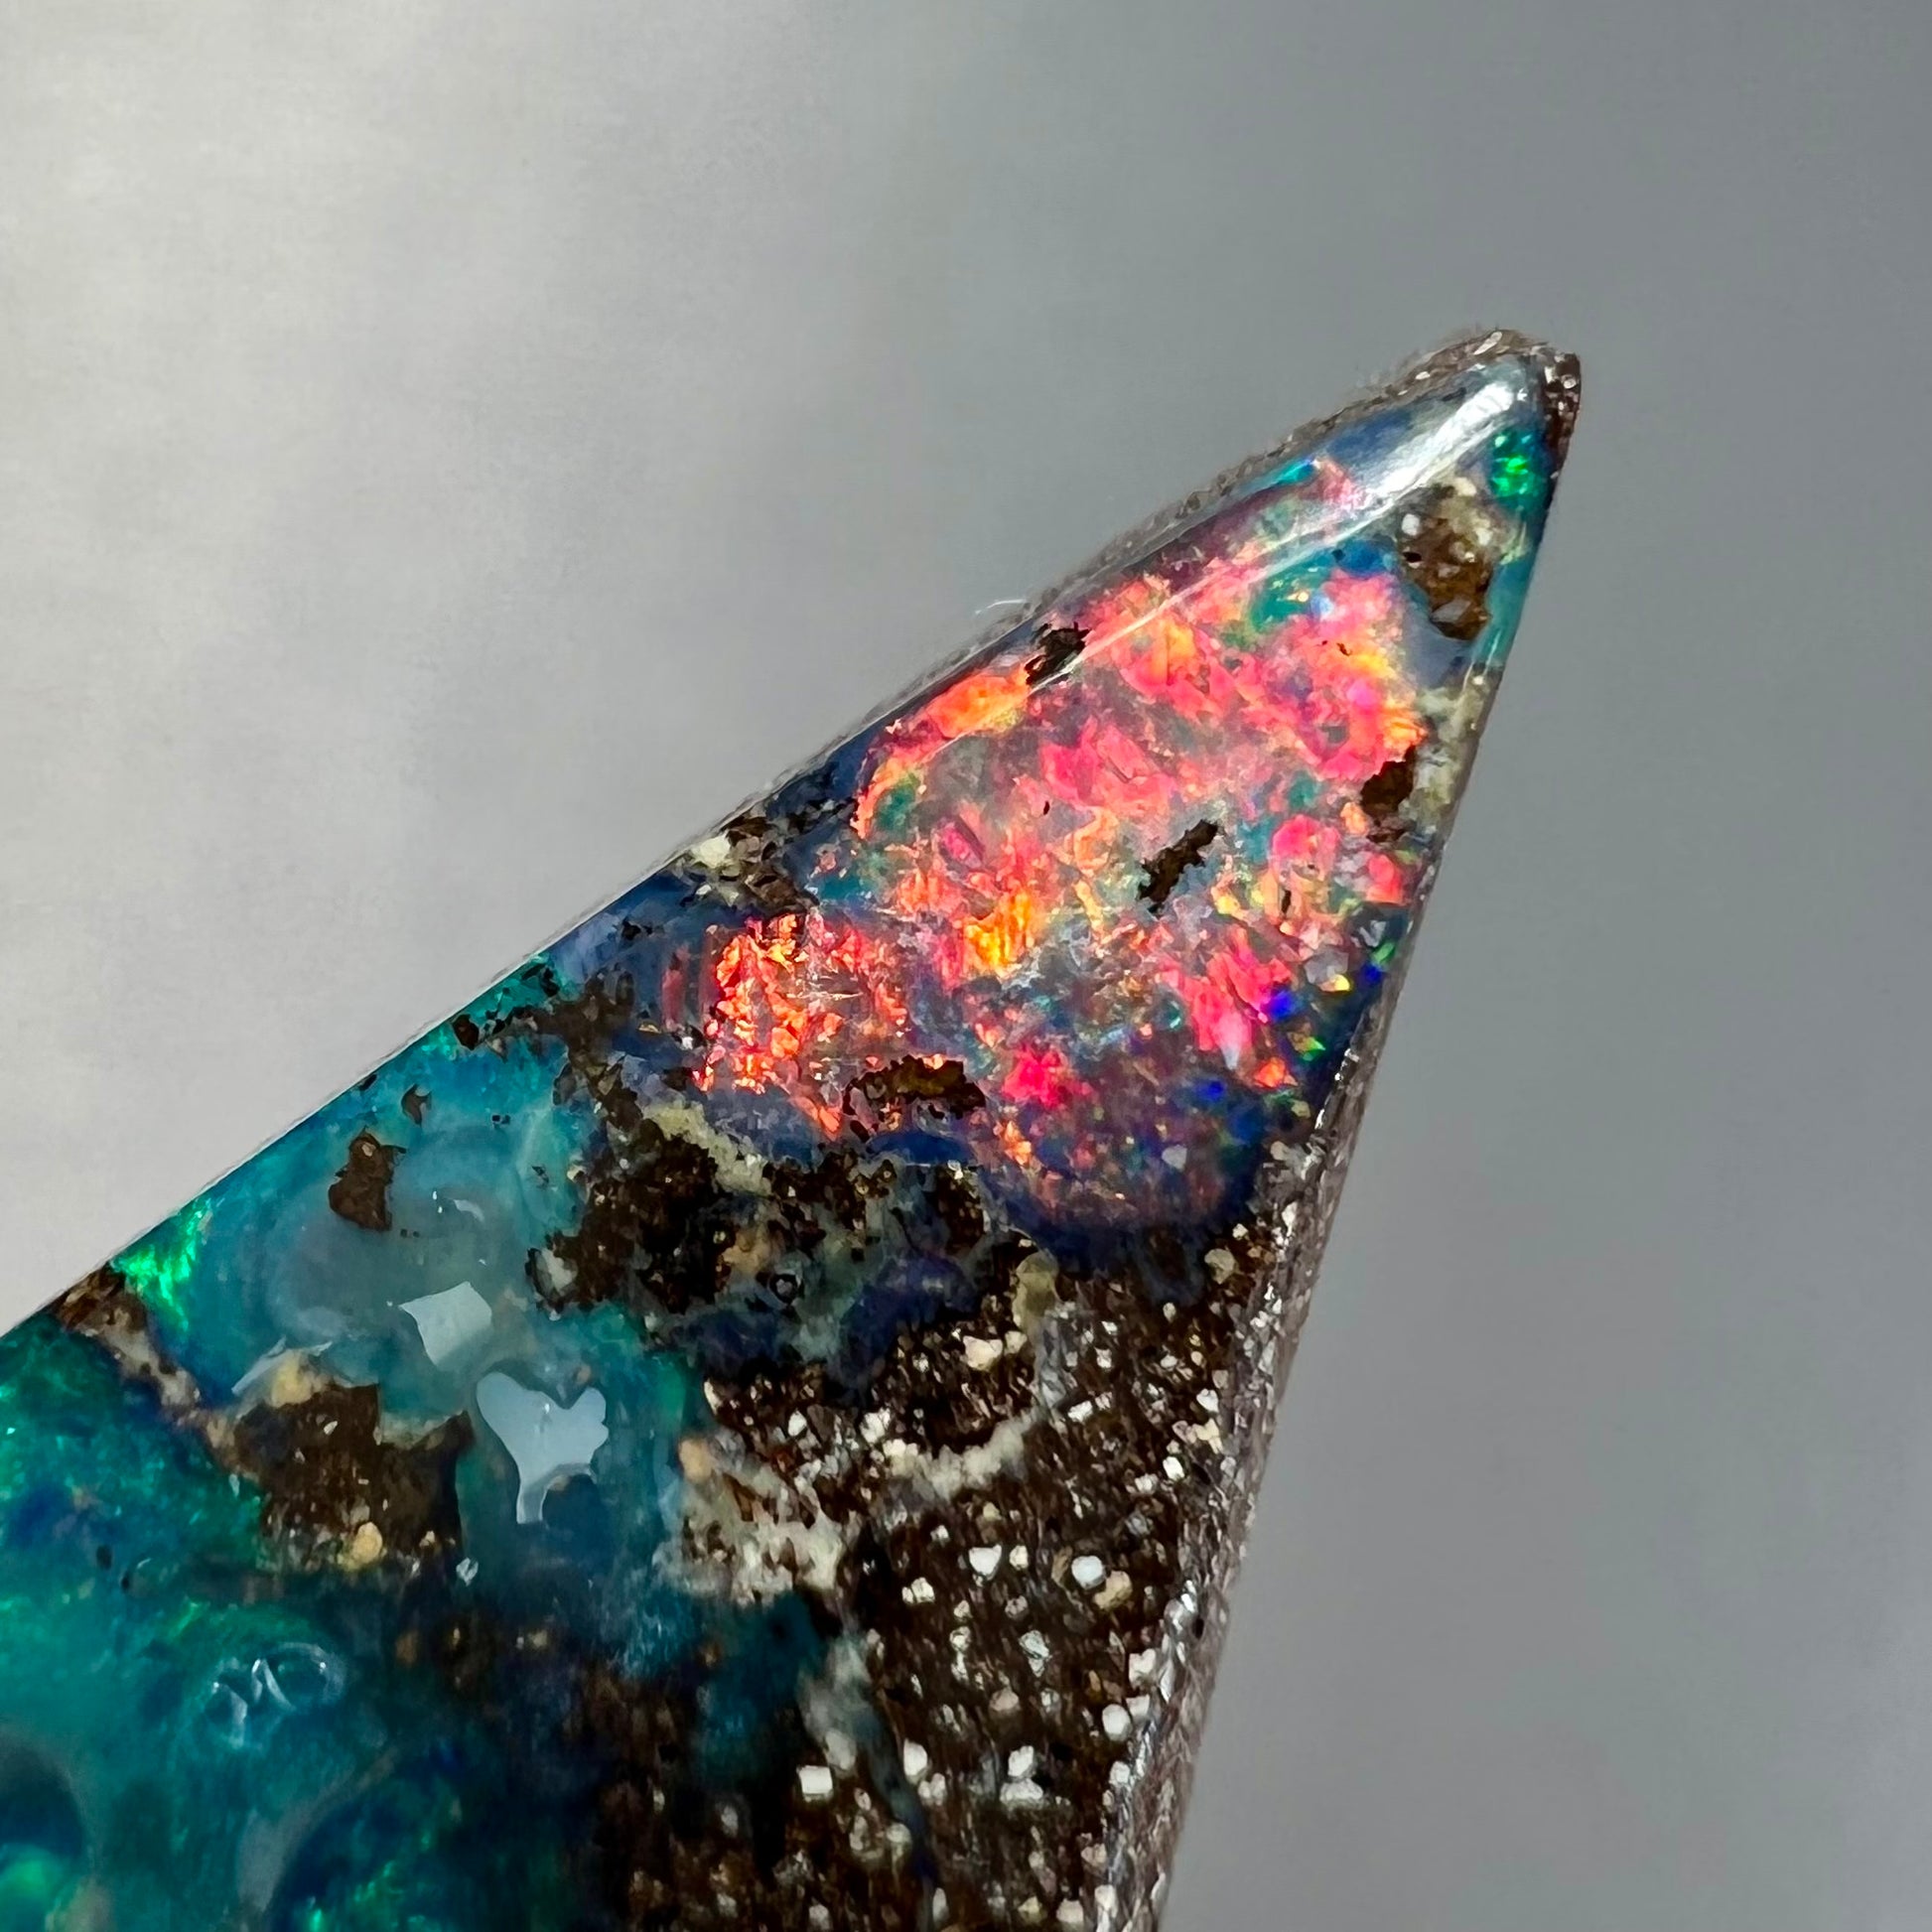 A loose Quilpie boulder opal stone.  The stone is blue and has a bright rainbow tip.